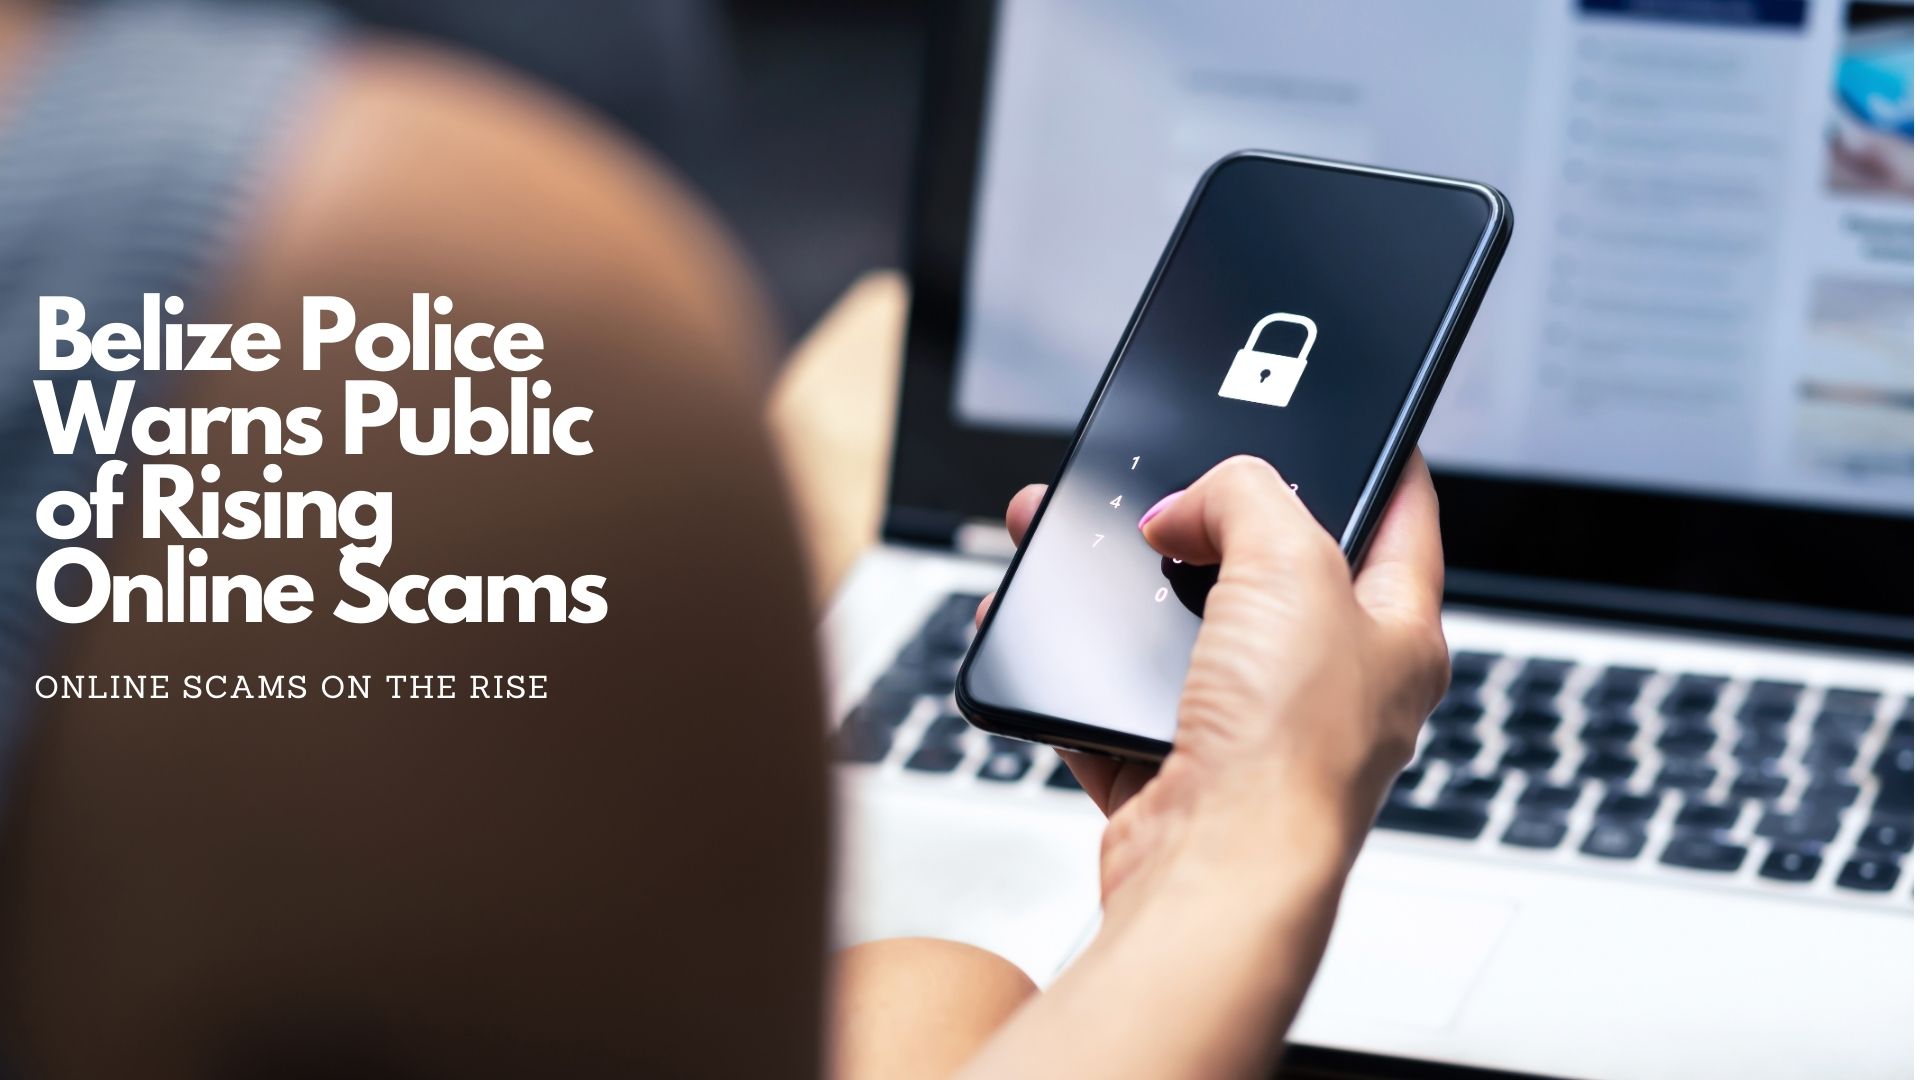 Belize Police Warns Public of Rising Online Scams